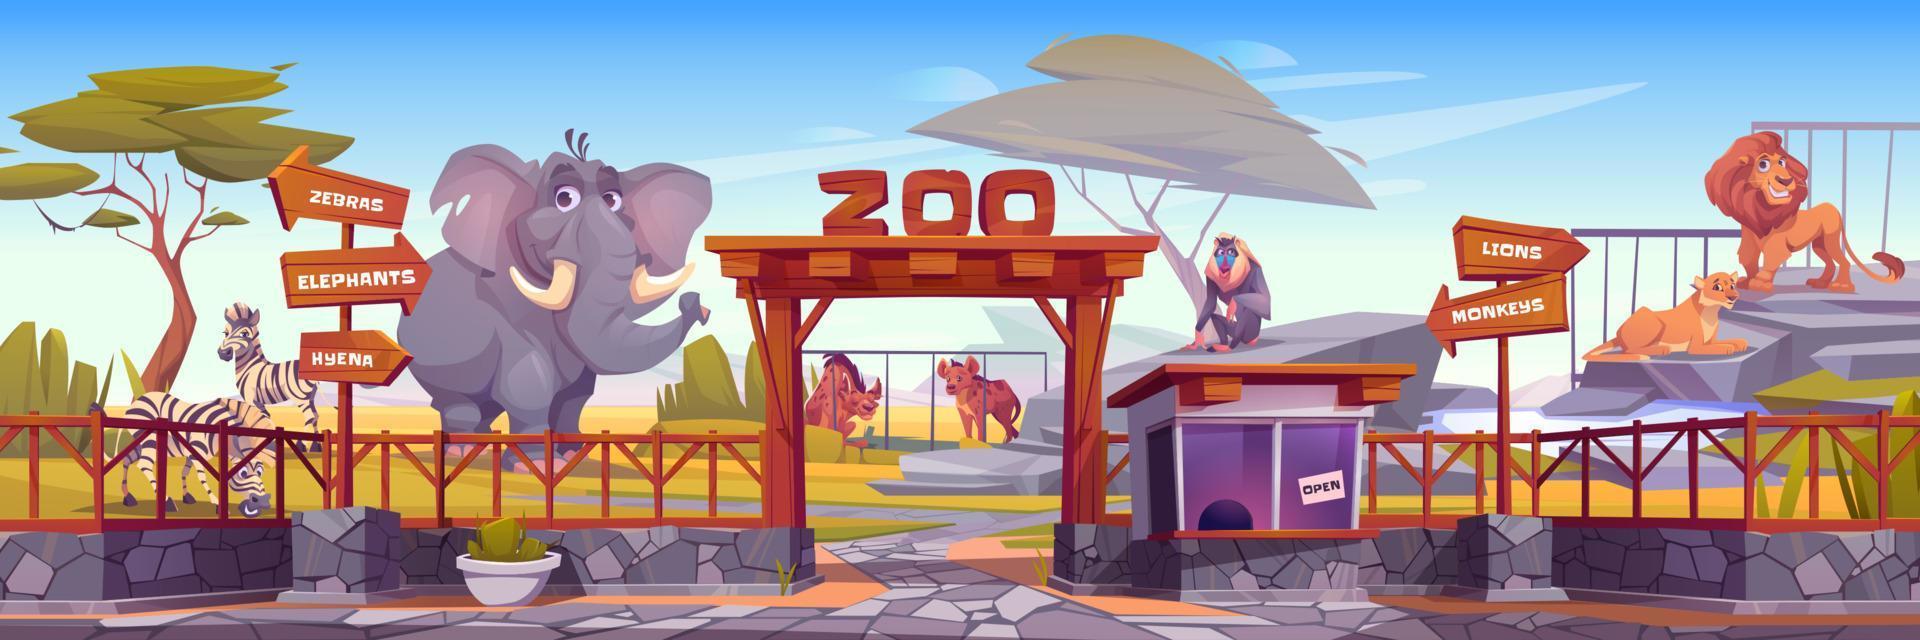 Zoo entrance gate and exotic African animals vector